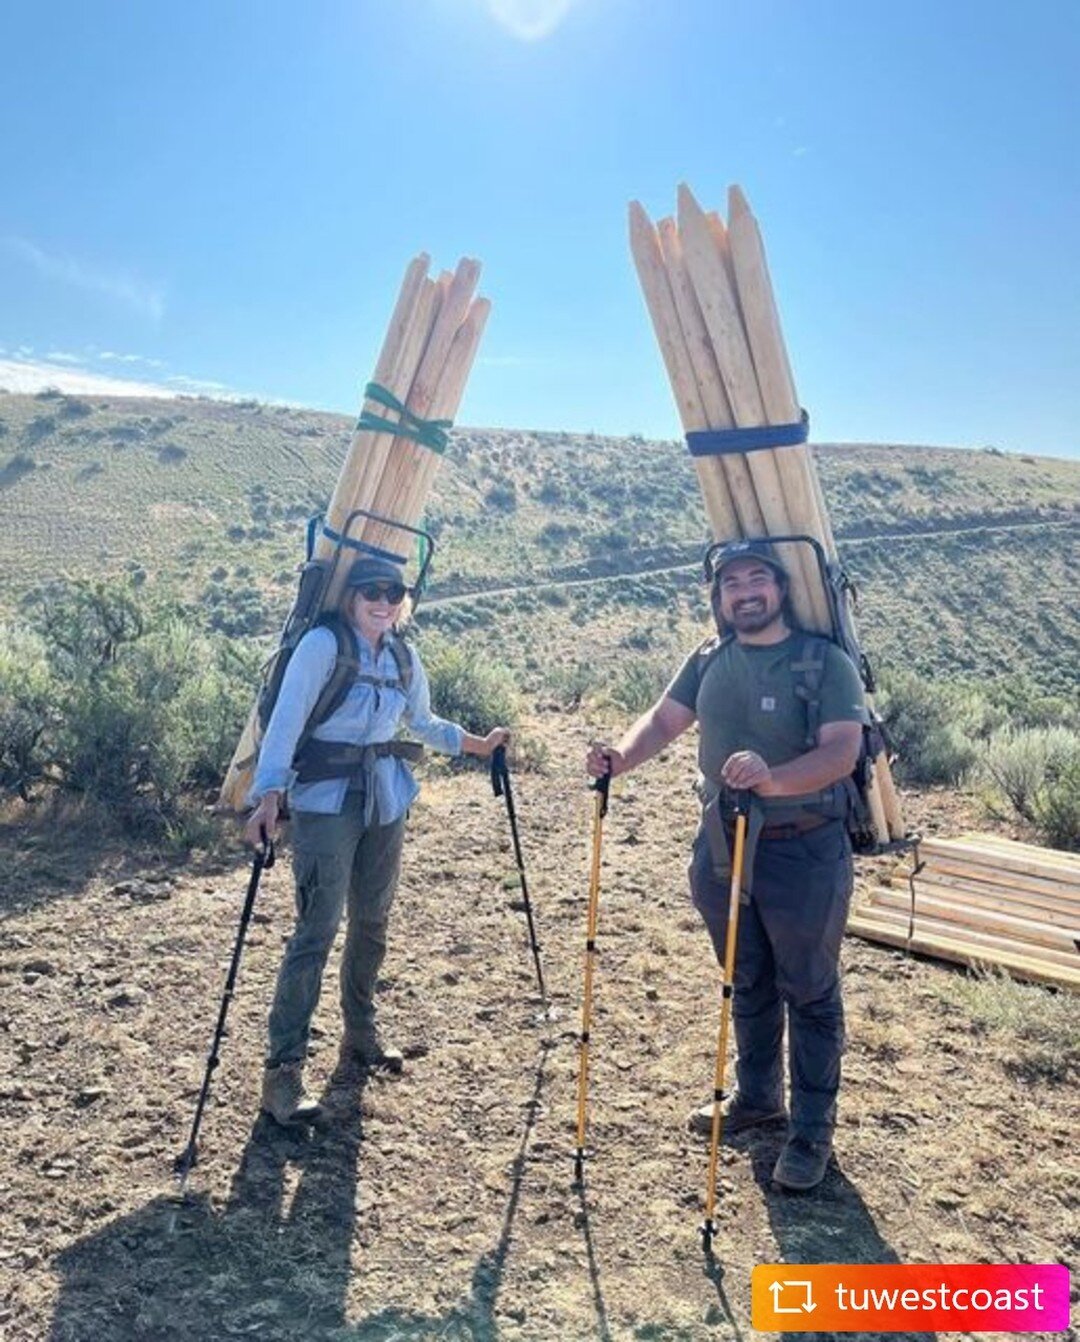 REPOST from @tuwestcoast 

Great update from TU&rsquo;s @wenatcheeentiatbeaverproject in Washington: &ldquo;We have been busy beavers! Thank you to @ccfeg, @cascadiacd, @usfws and Natural Resources Conservation Service for helping us move 600 posts a